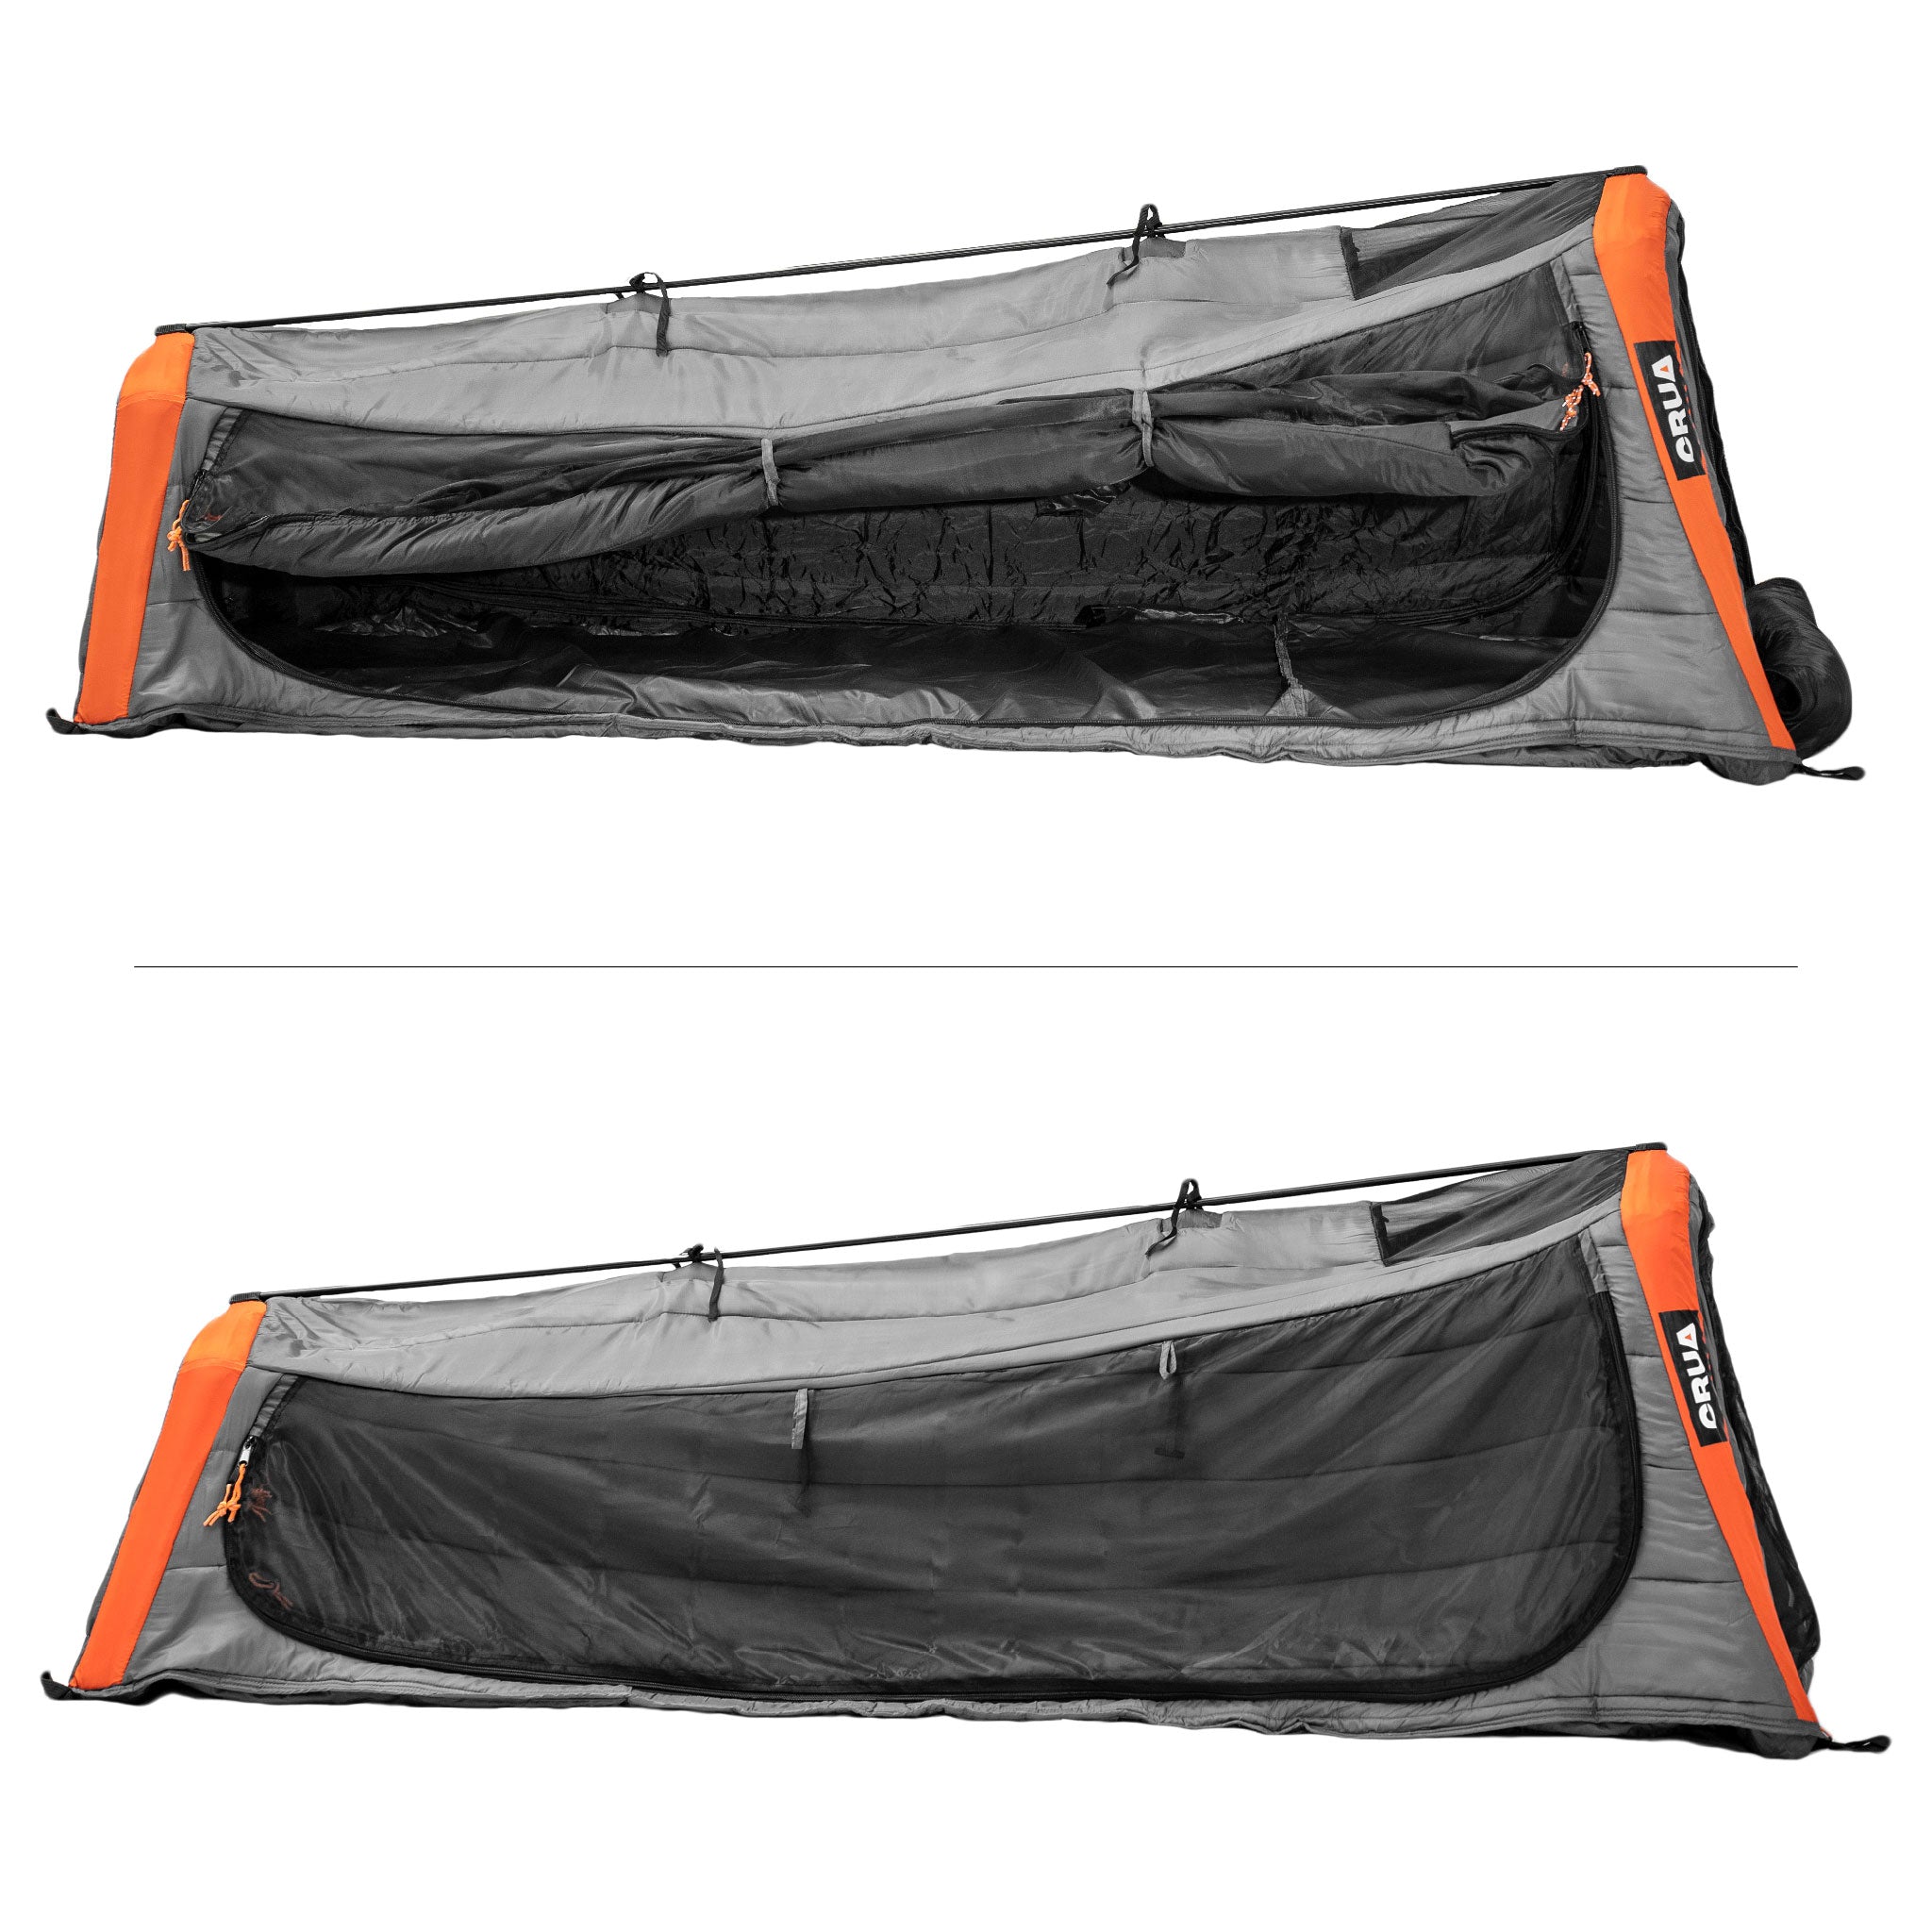 CULLA SOLO | 1 PERSON INSULATED INNER TENT WITH TEMPERATURE REGULATING, NOISE DAMPENING AND LIGHT BLOCKING FEATURES